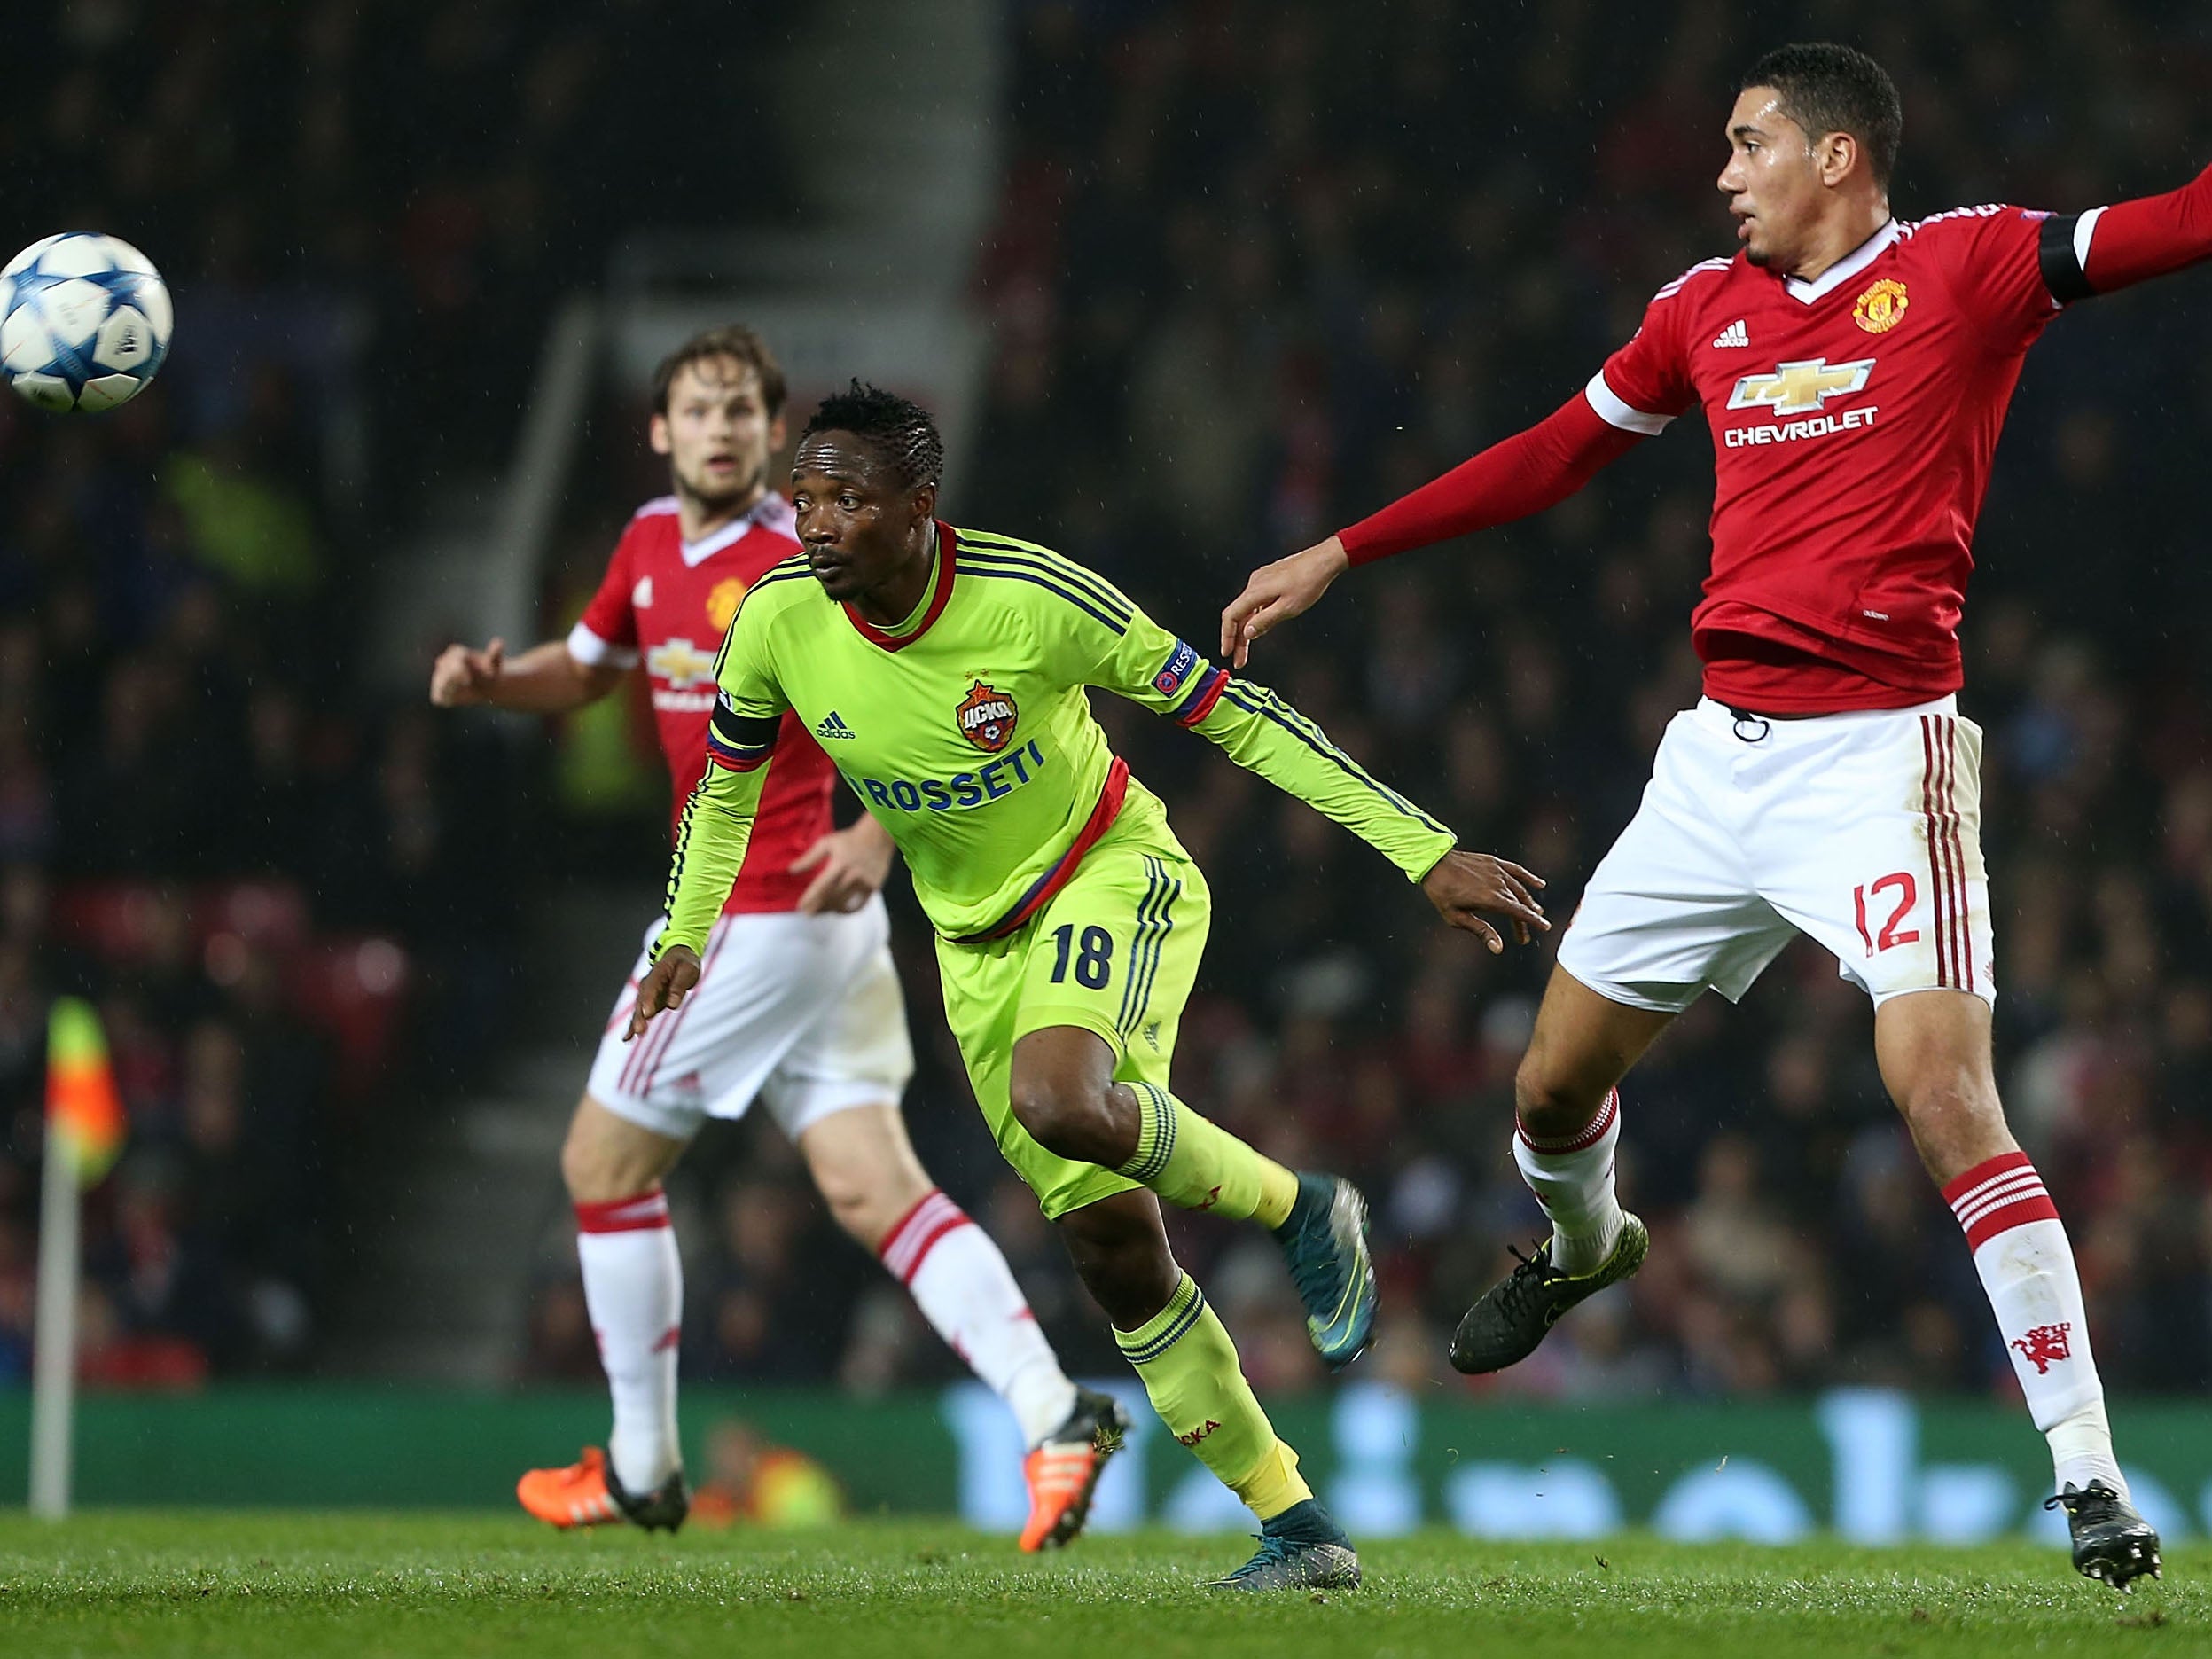 CSKA Moscow striker Ahmed Musa in action against Manchester United earlier this season